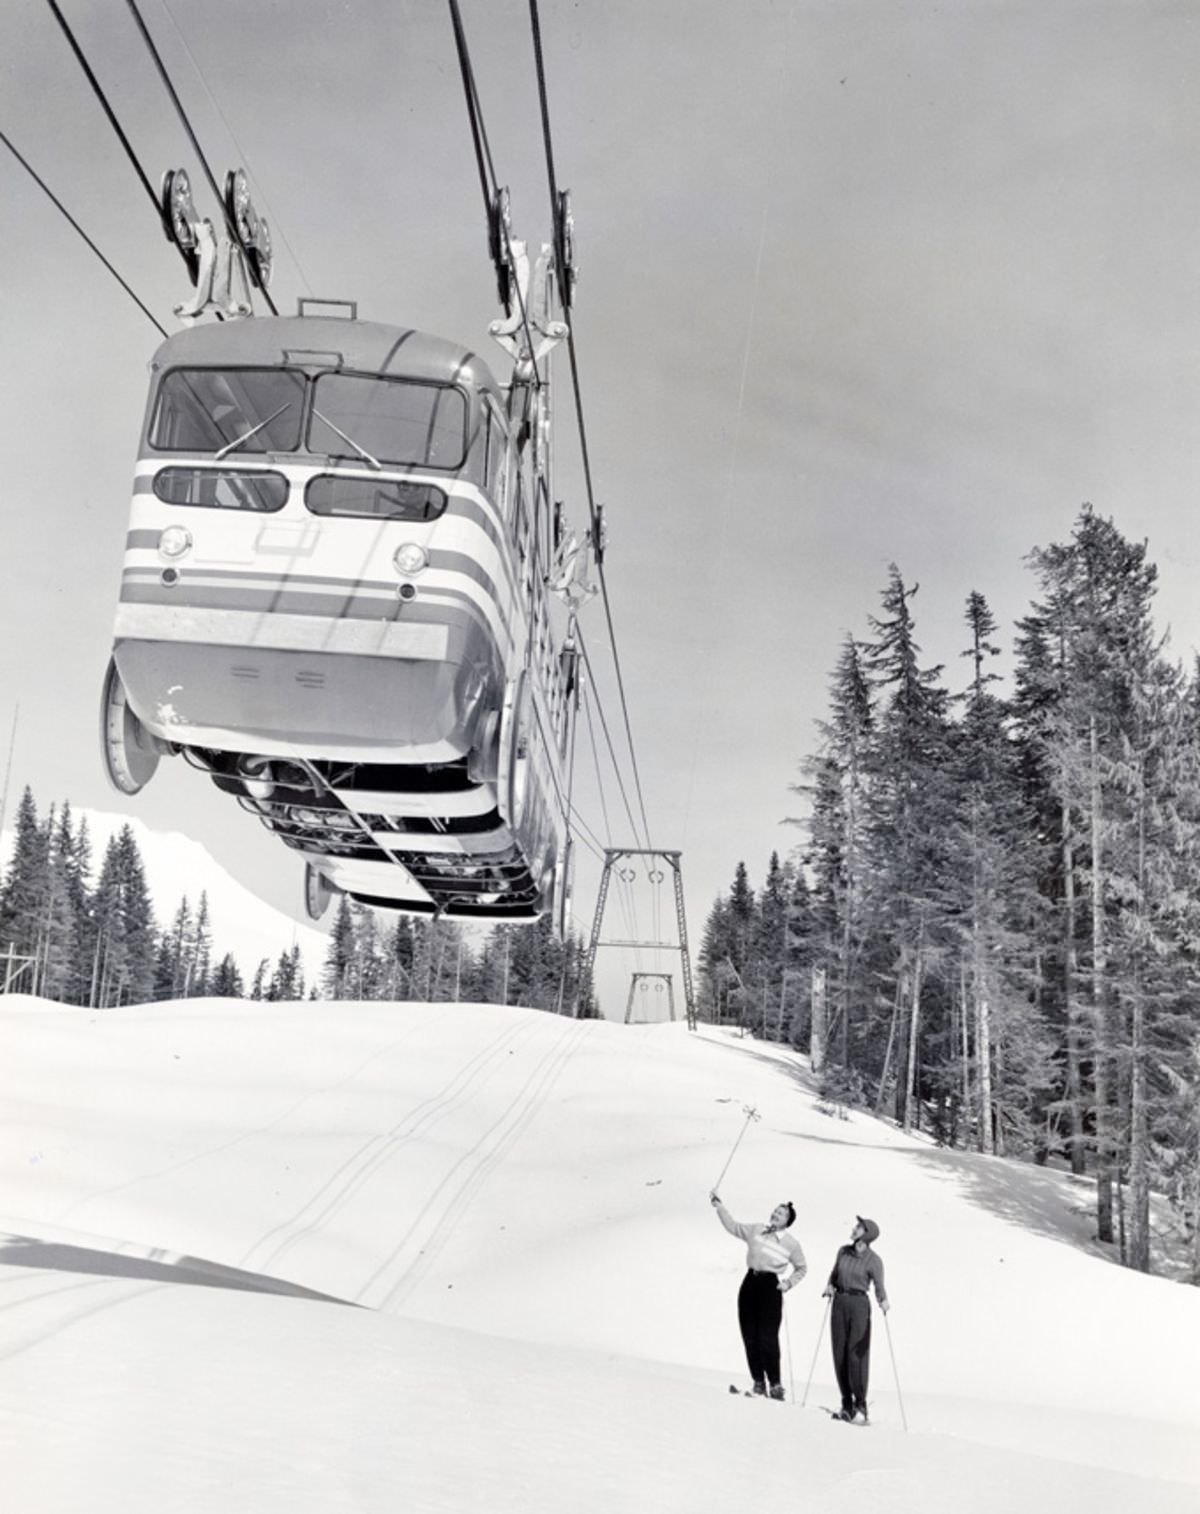 Two skiers stand on a snowy ski slope below a Skiway tram car on November 25, 1951.